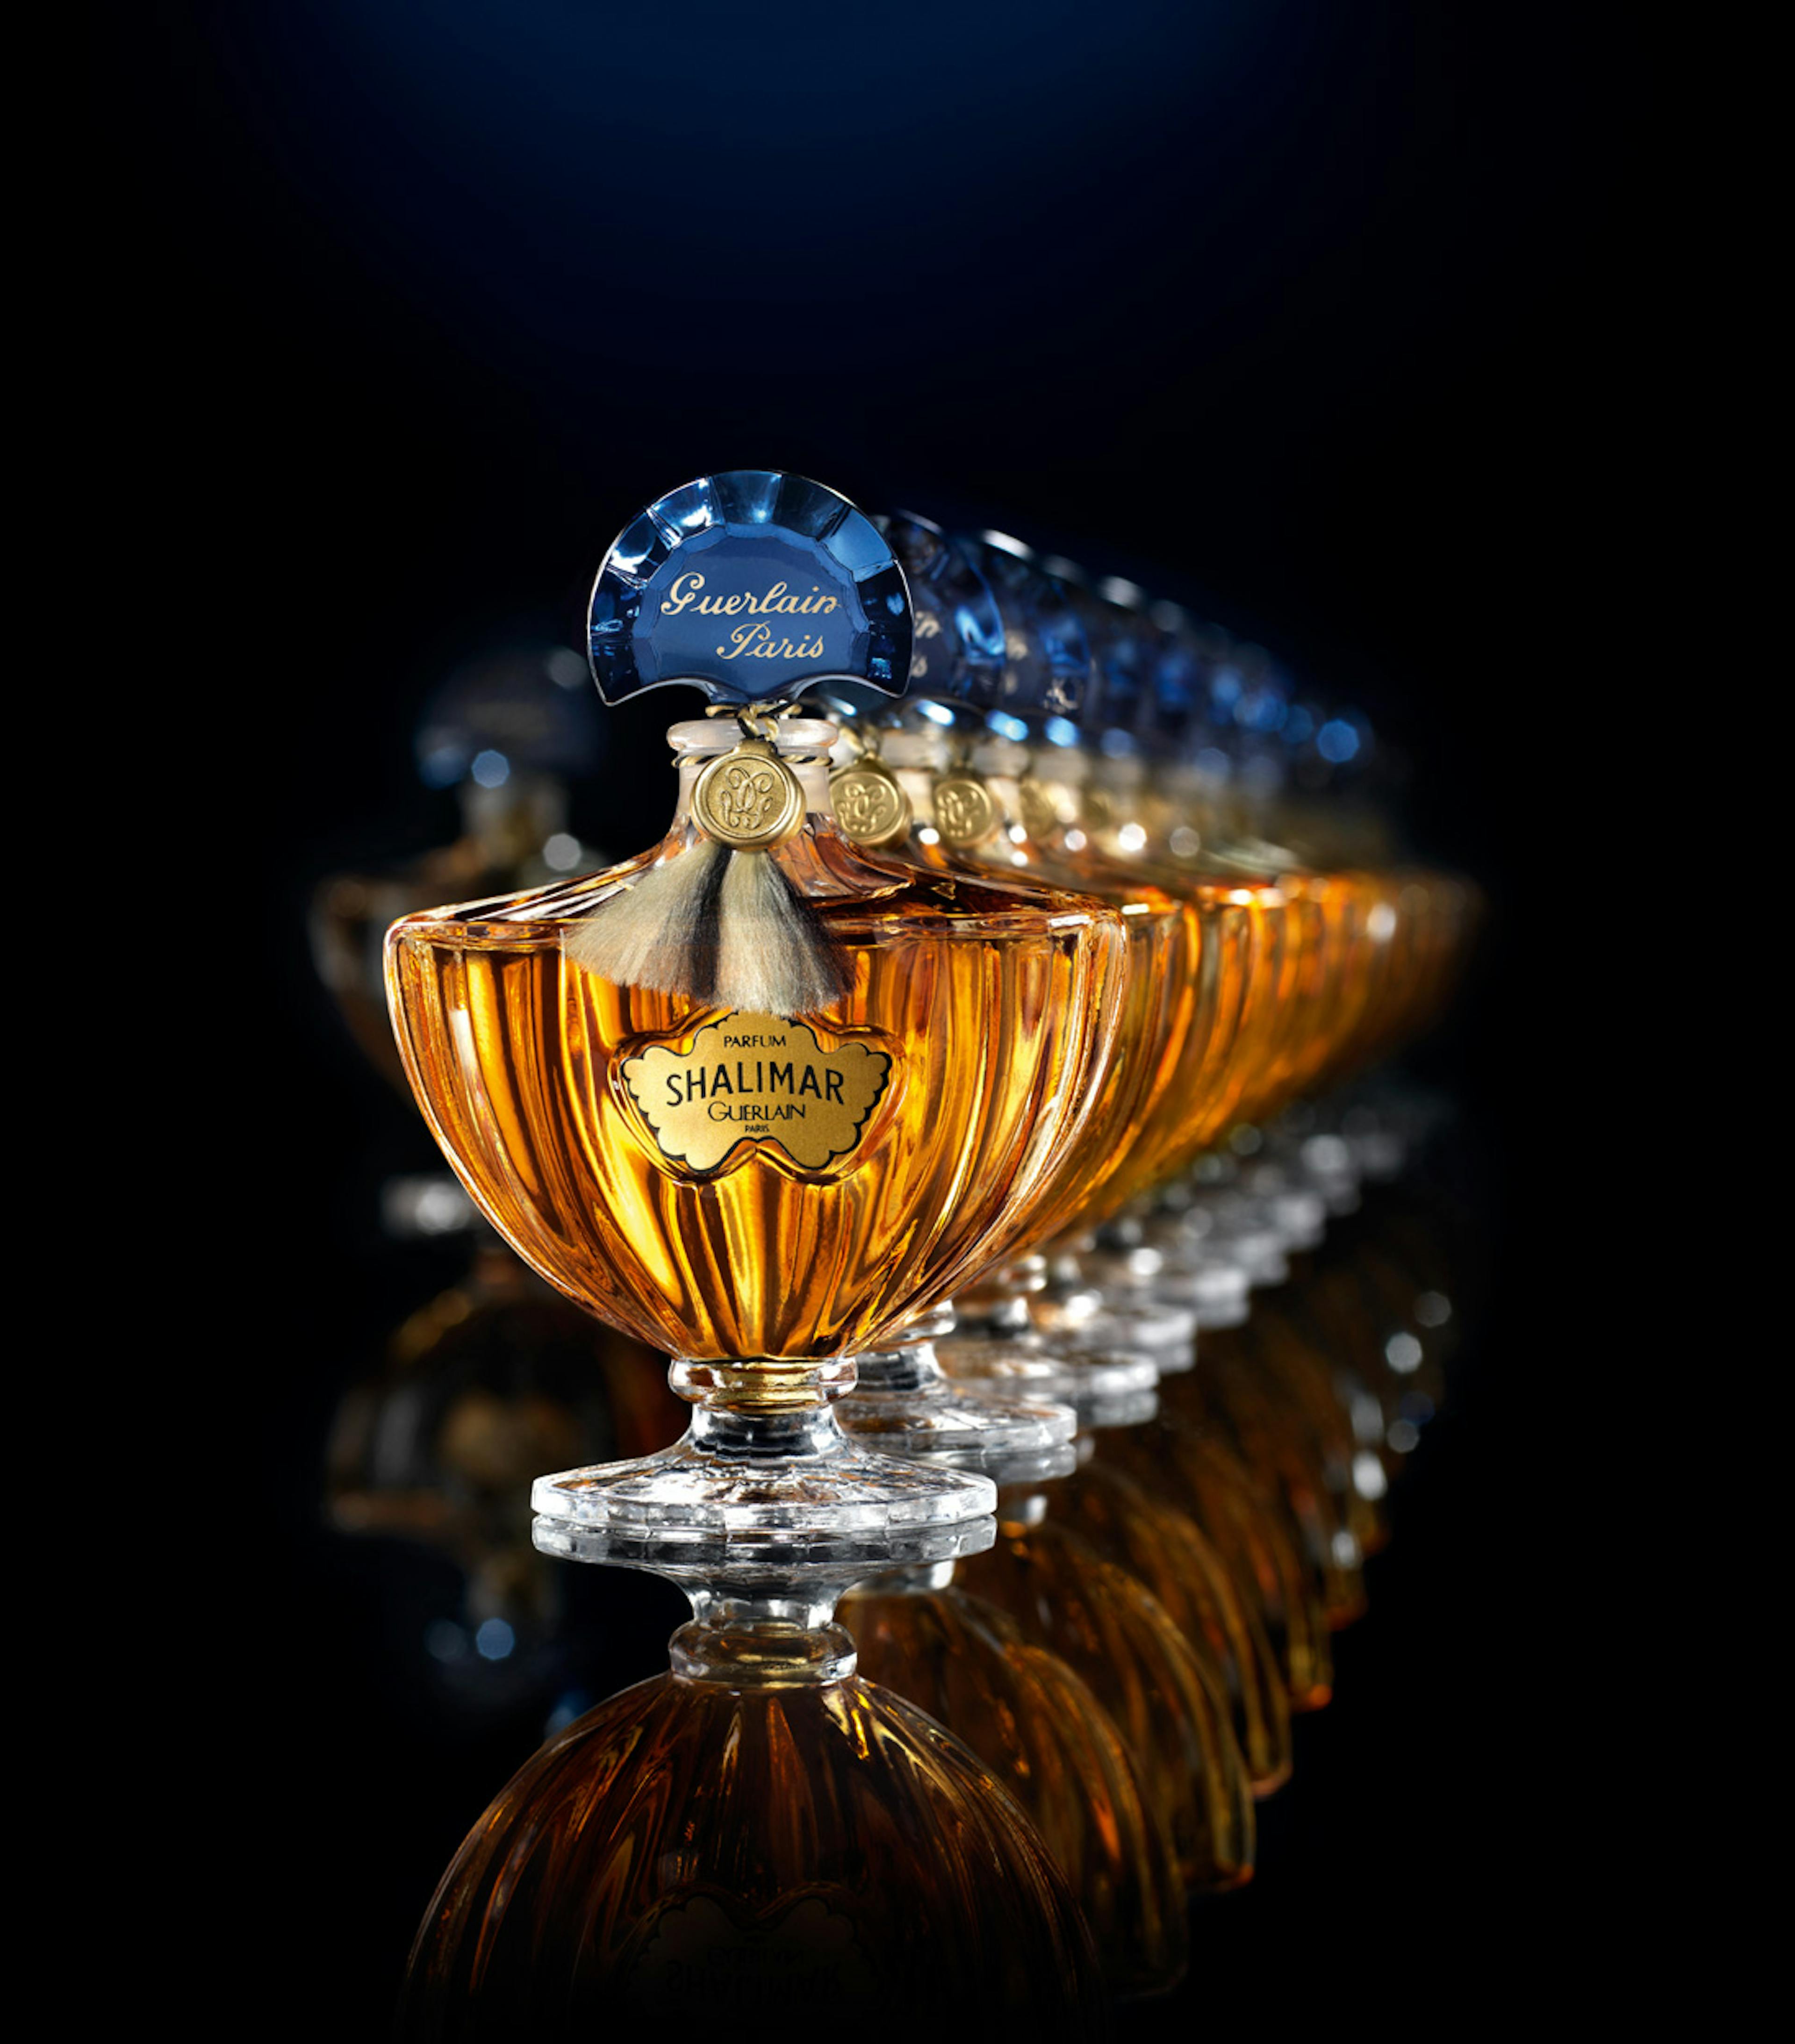 Shalimar Extract © All rights reserved Guerlain